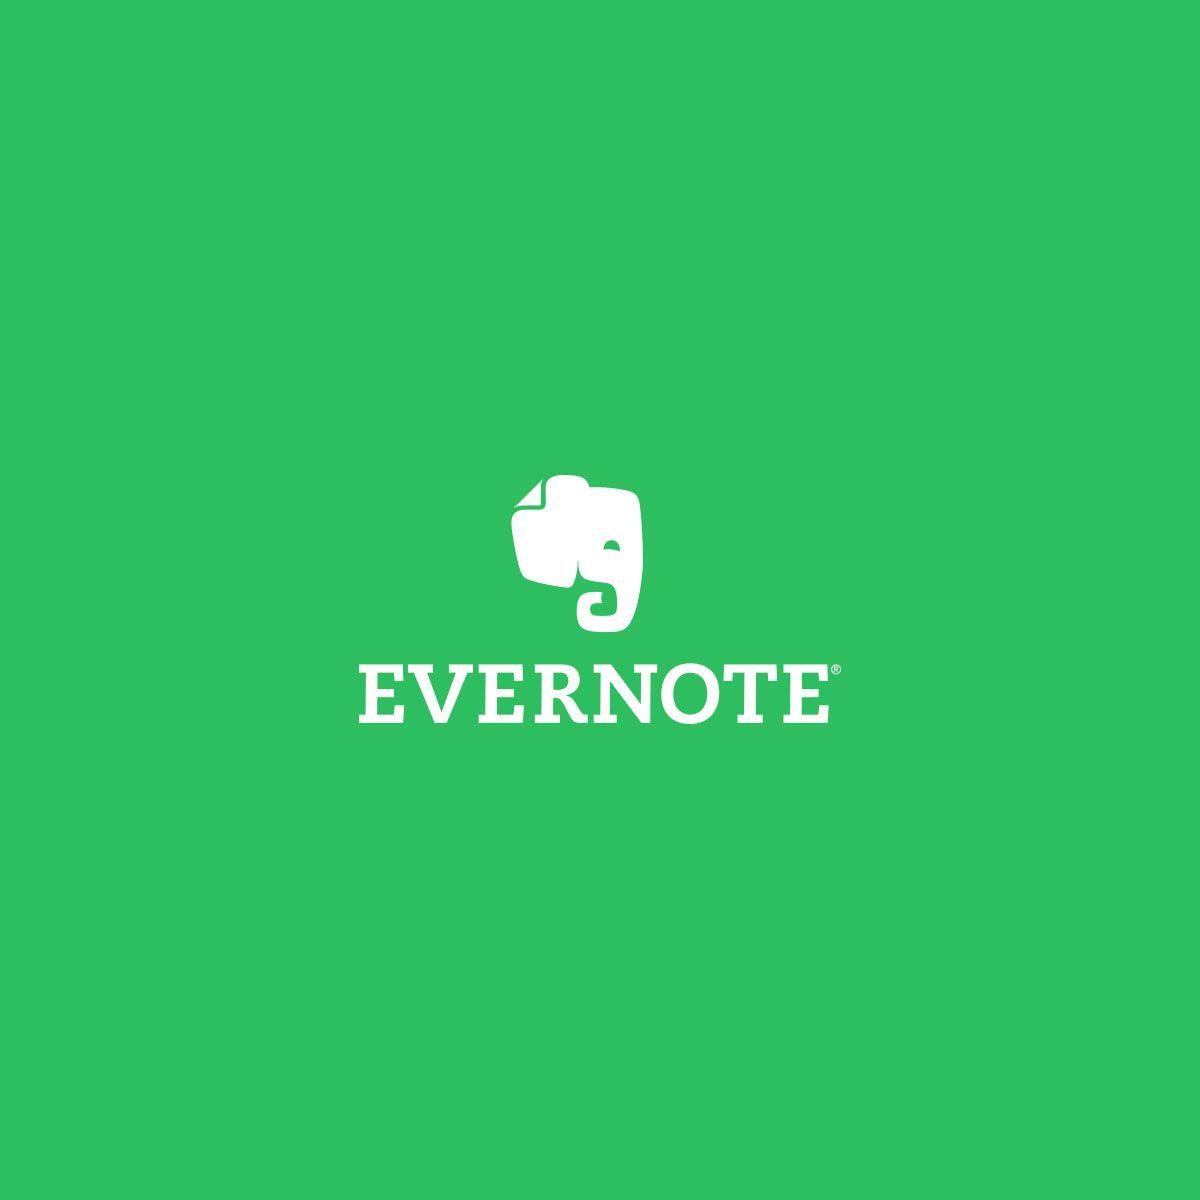 Evernote Logo - Productivity Hack - What is Evernote and Do I Need It? - Protrade United